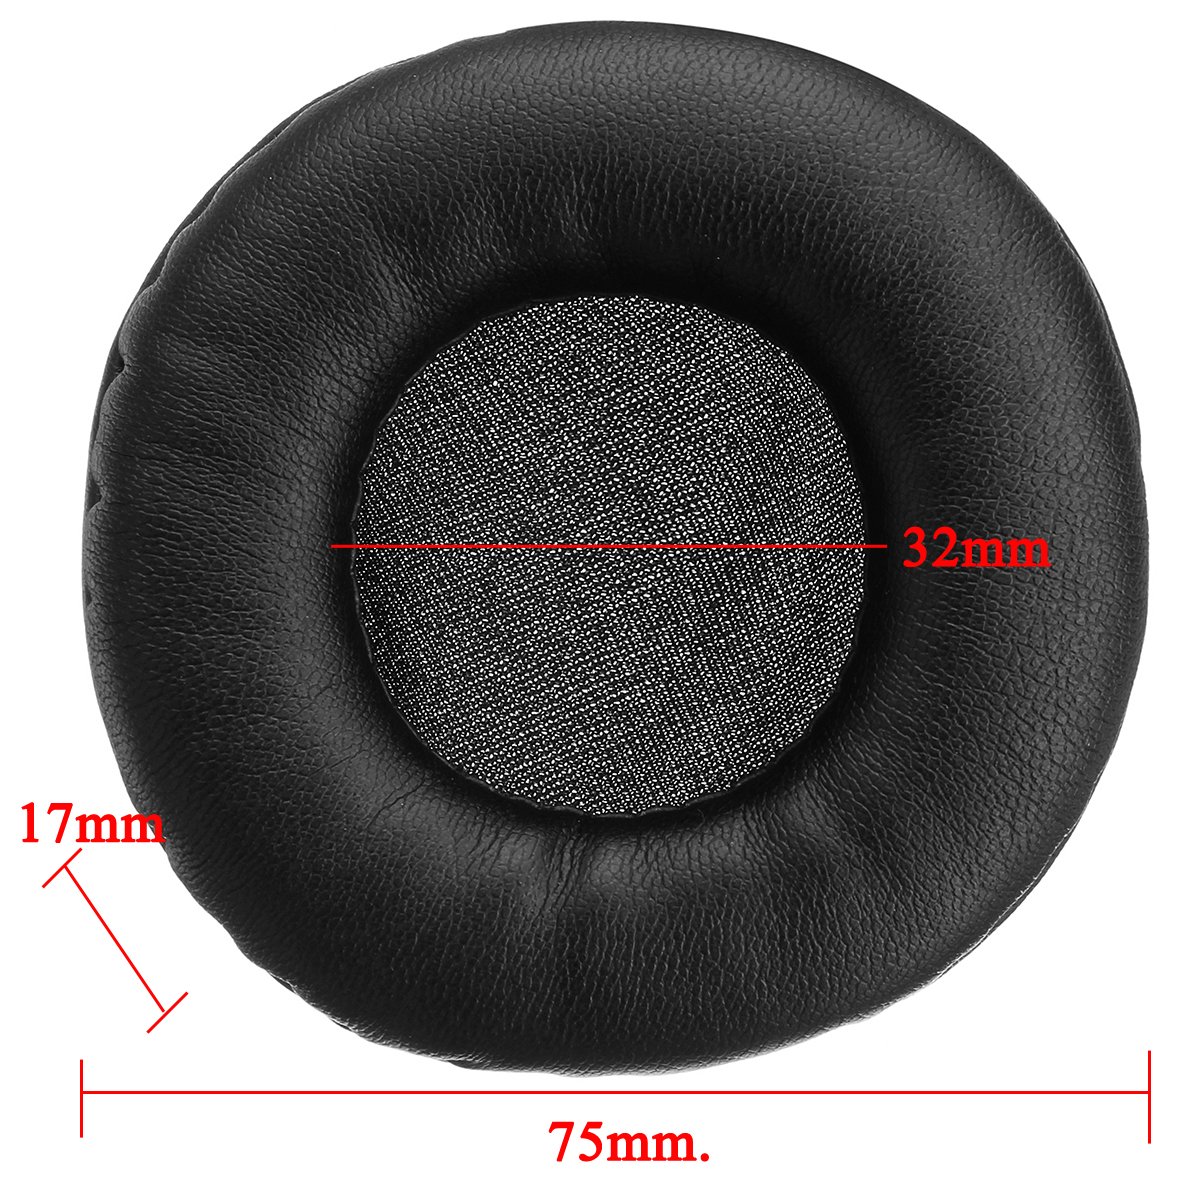 1-Pair-75mm-Replacement-Earpads-Ear-Cushion-Cover-For-Sony-MDR-NC6-Headphone-Headset-Ear-Pads-1357351